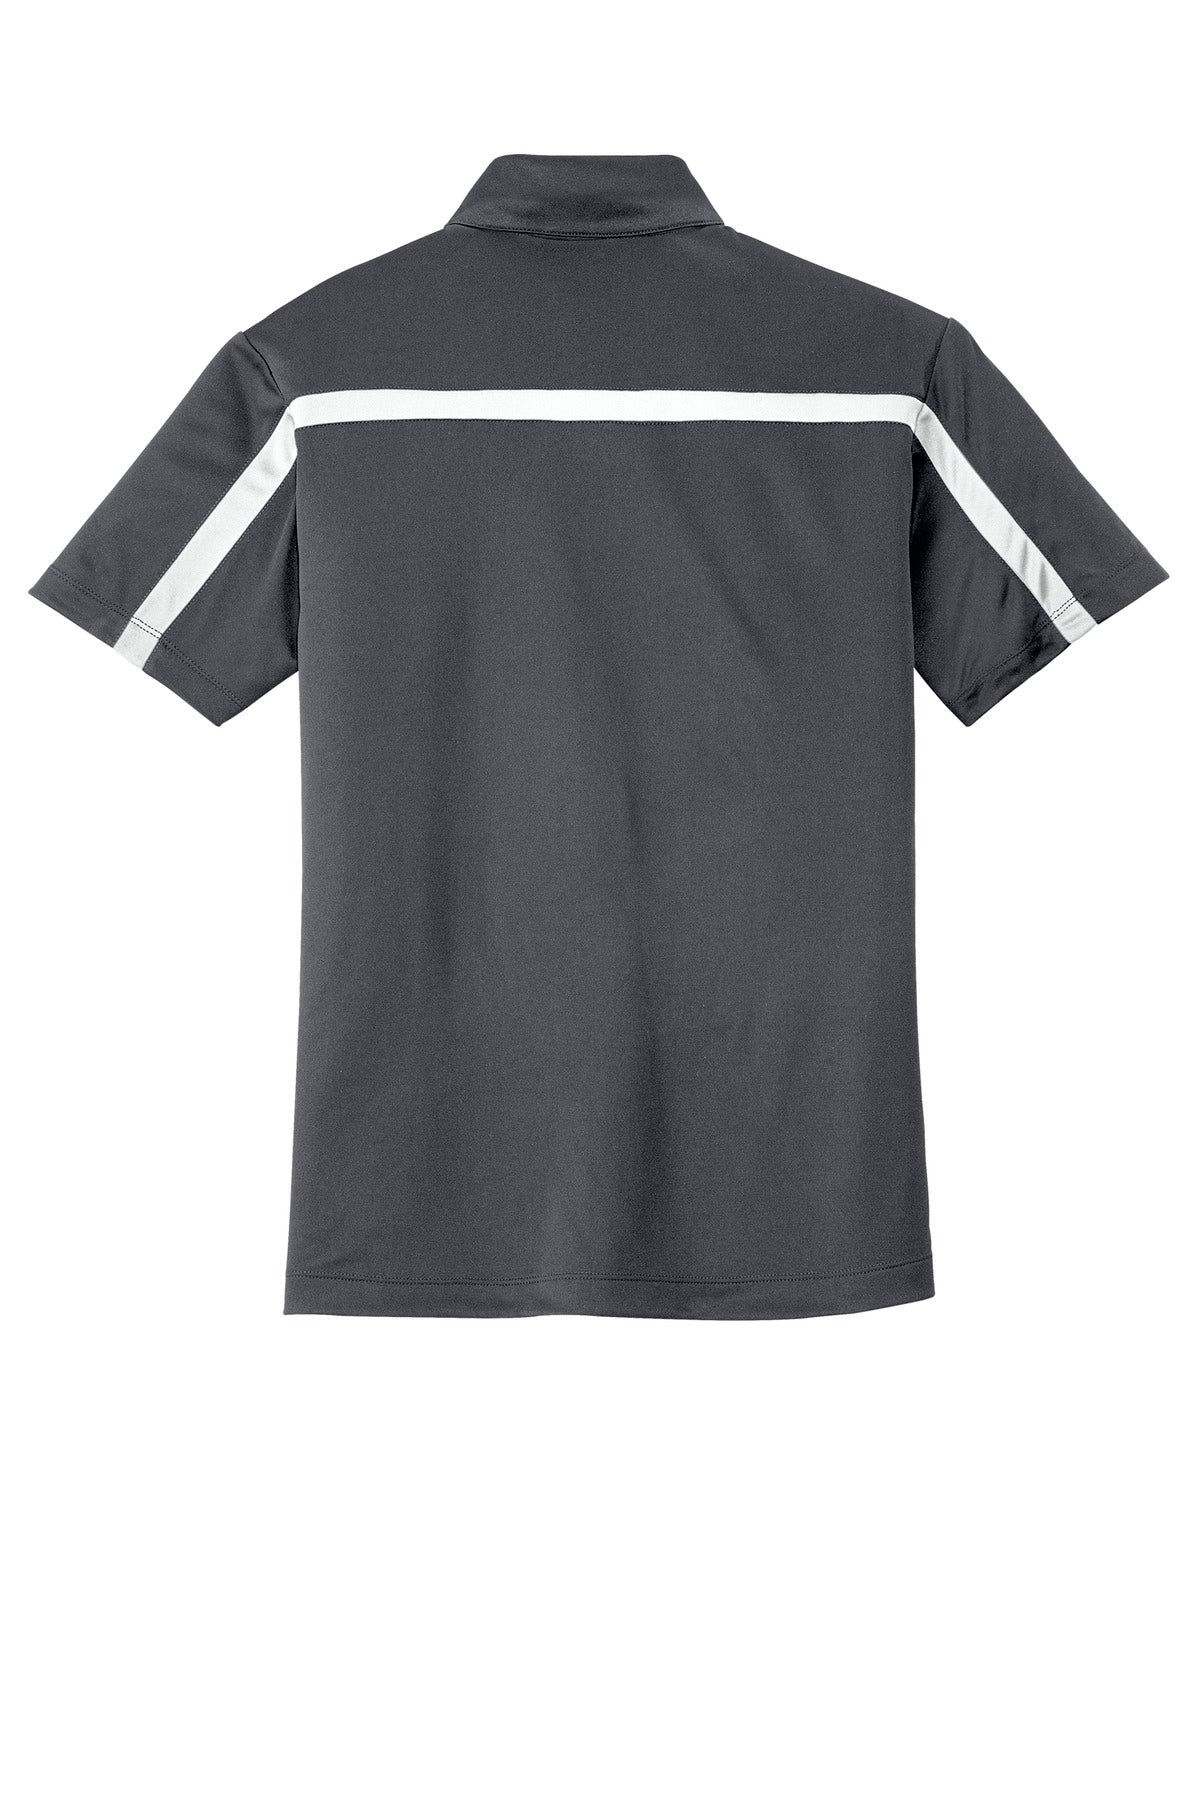 Port Authority Silk Touch™ Performance Colorblock Stripe Polo. K547